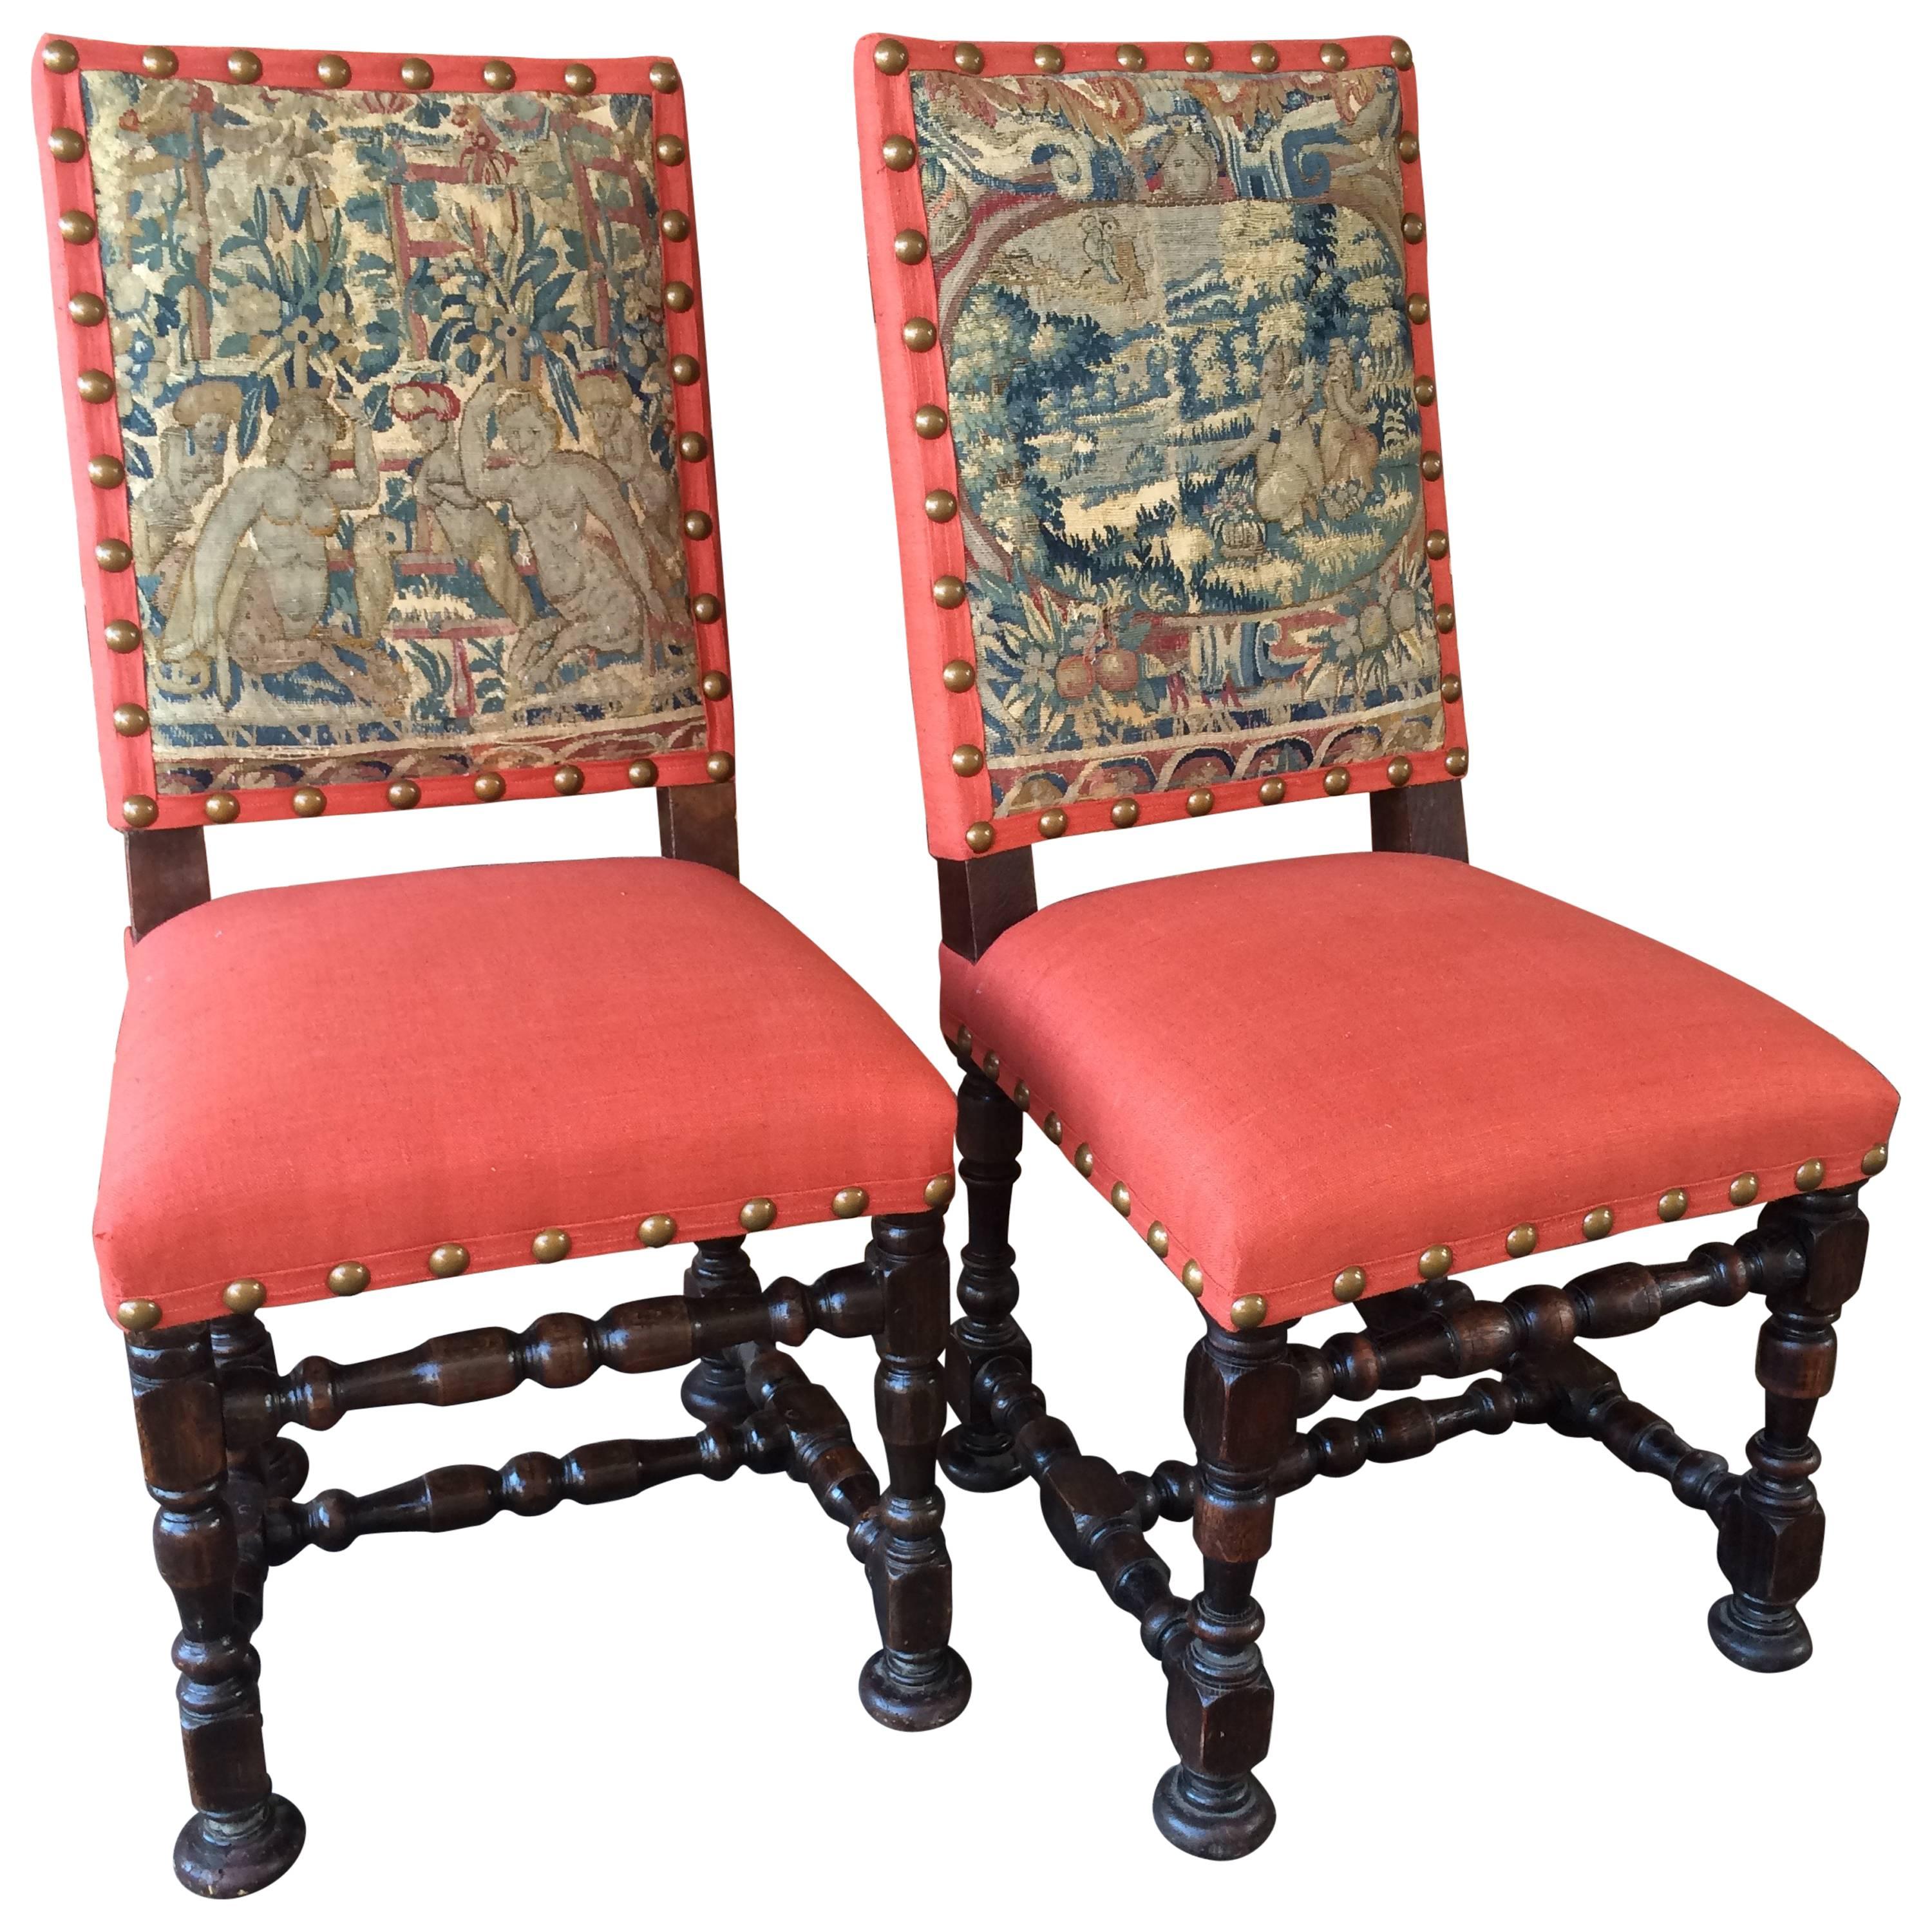 Rare Pair of 17th Century Louis XIV Period Side Chairs